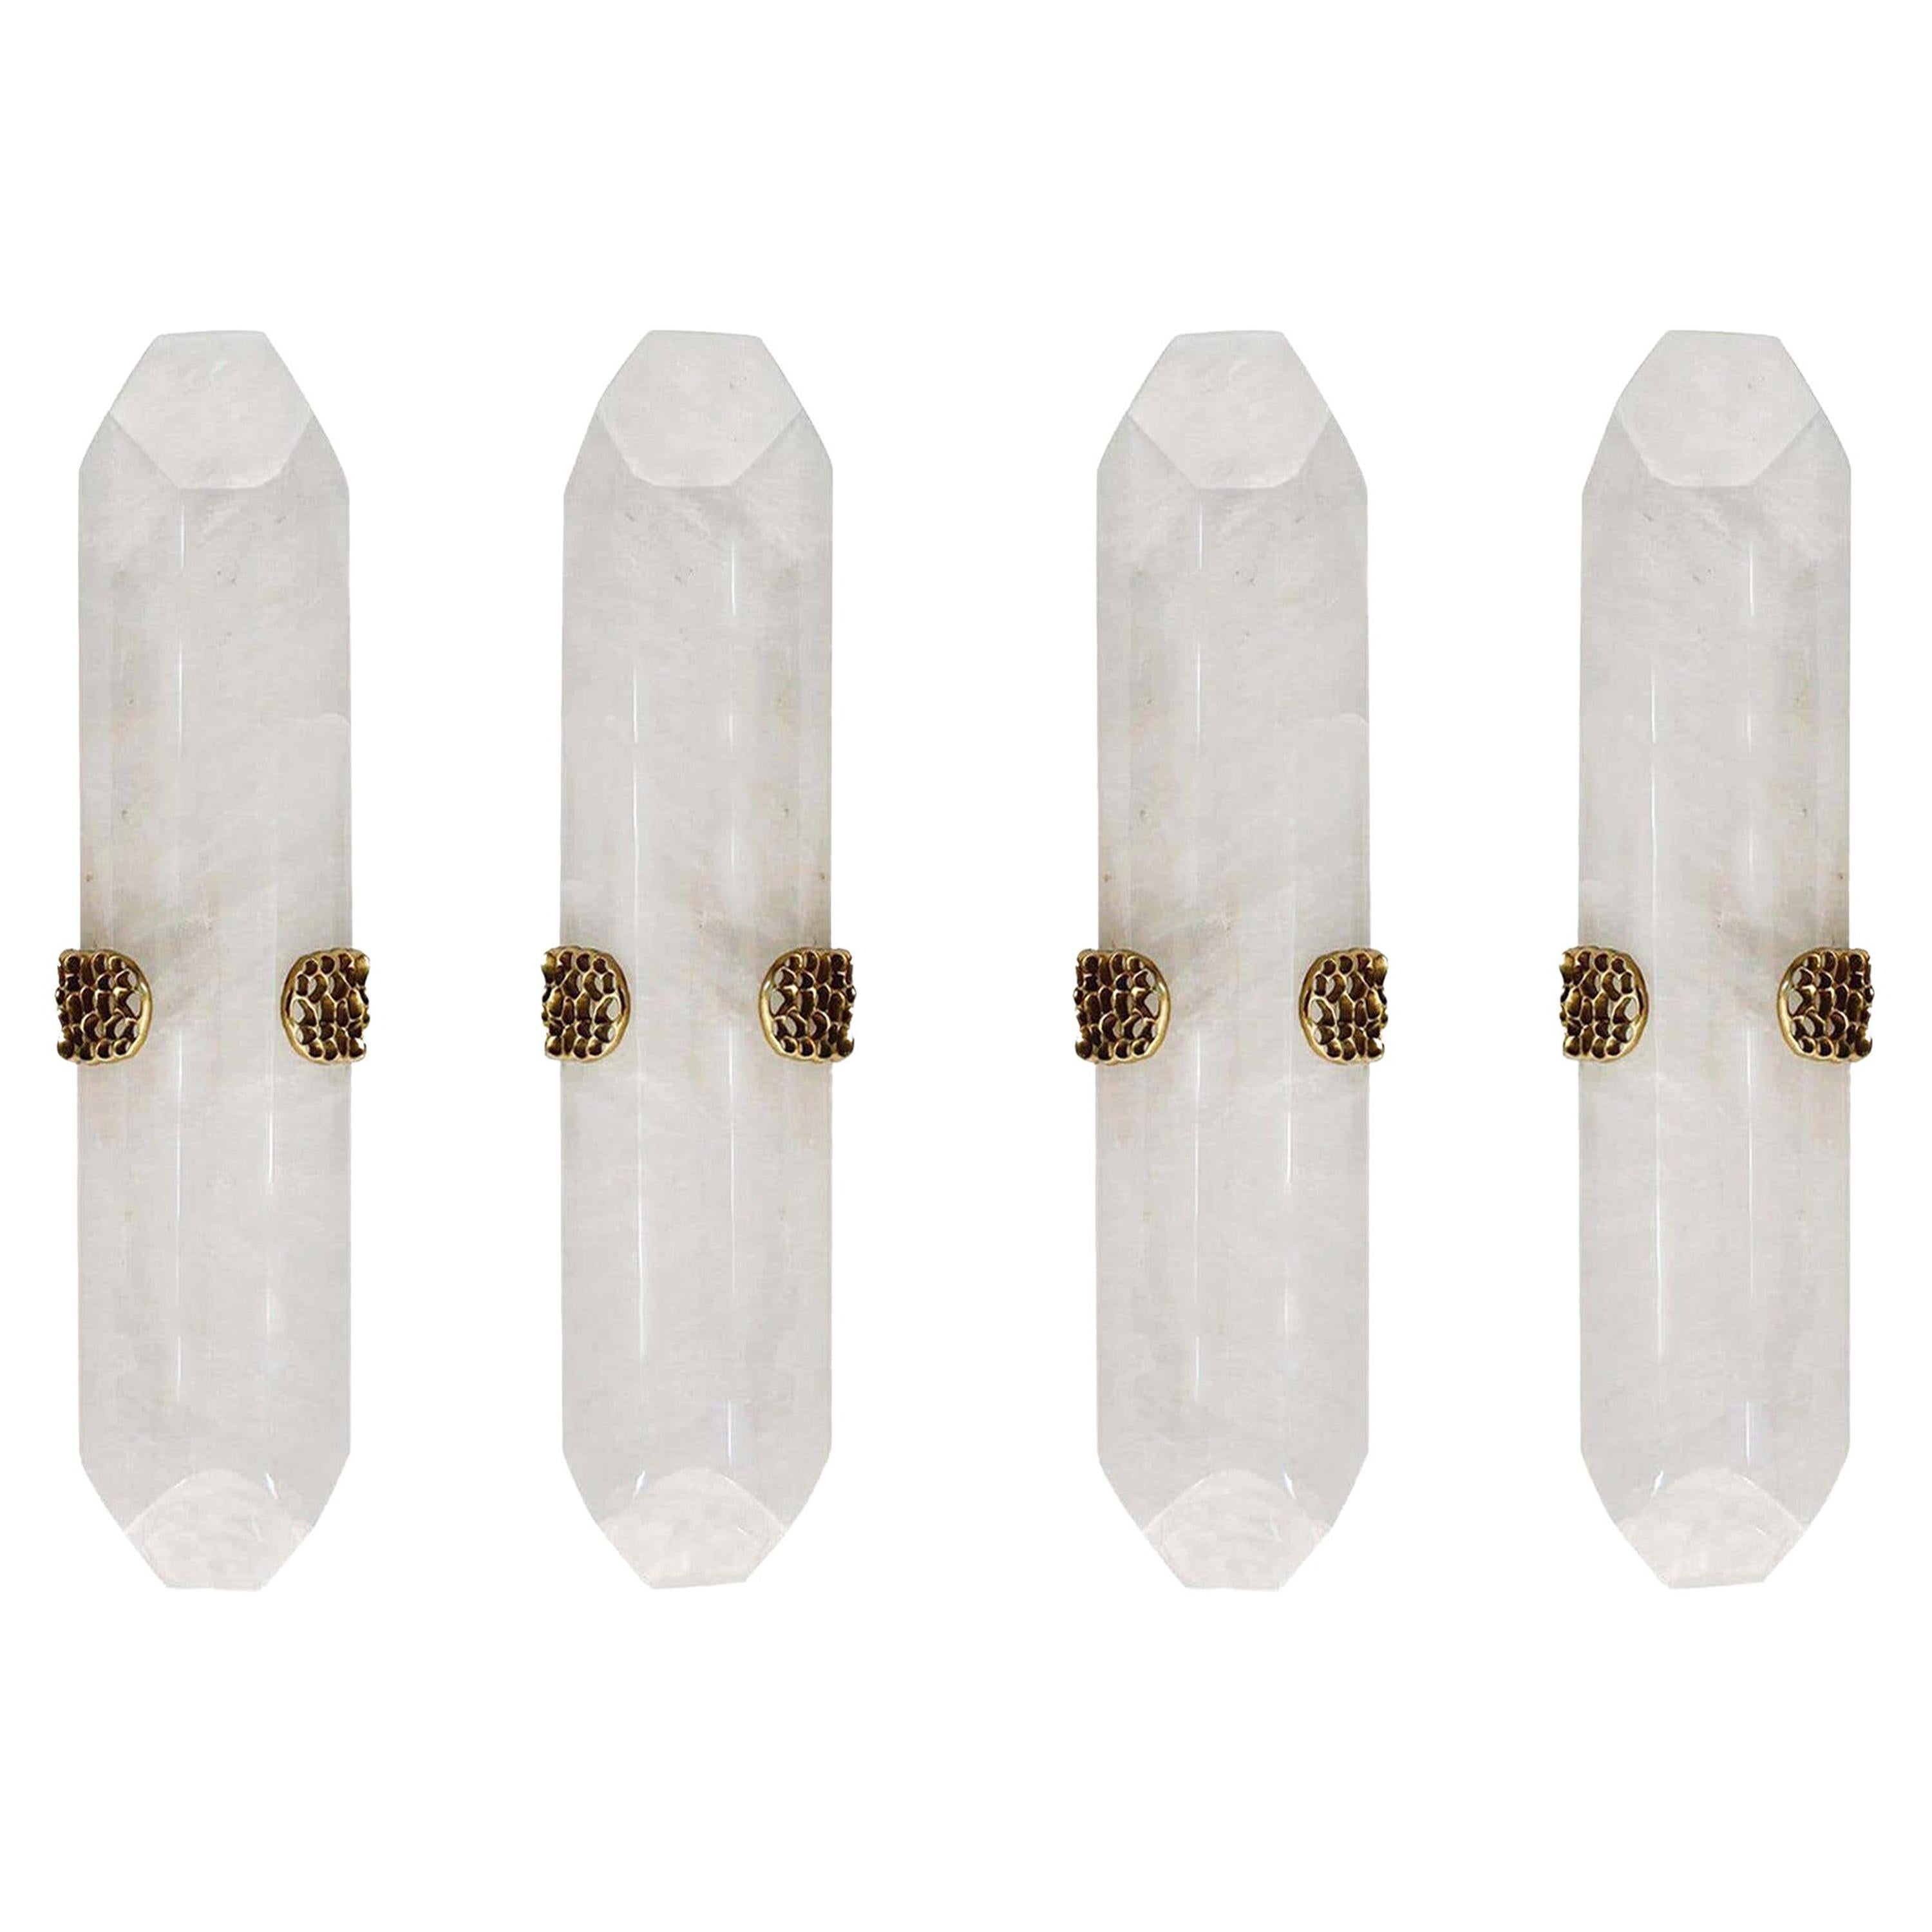 TDW22 Rock Crystal Sconces by Phoenix For Sale